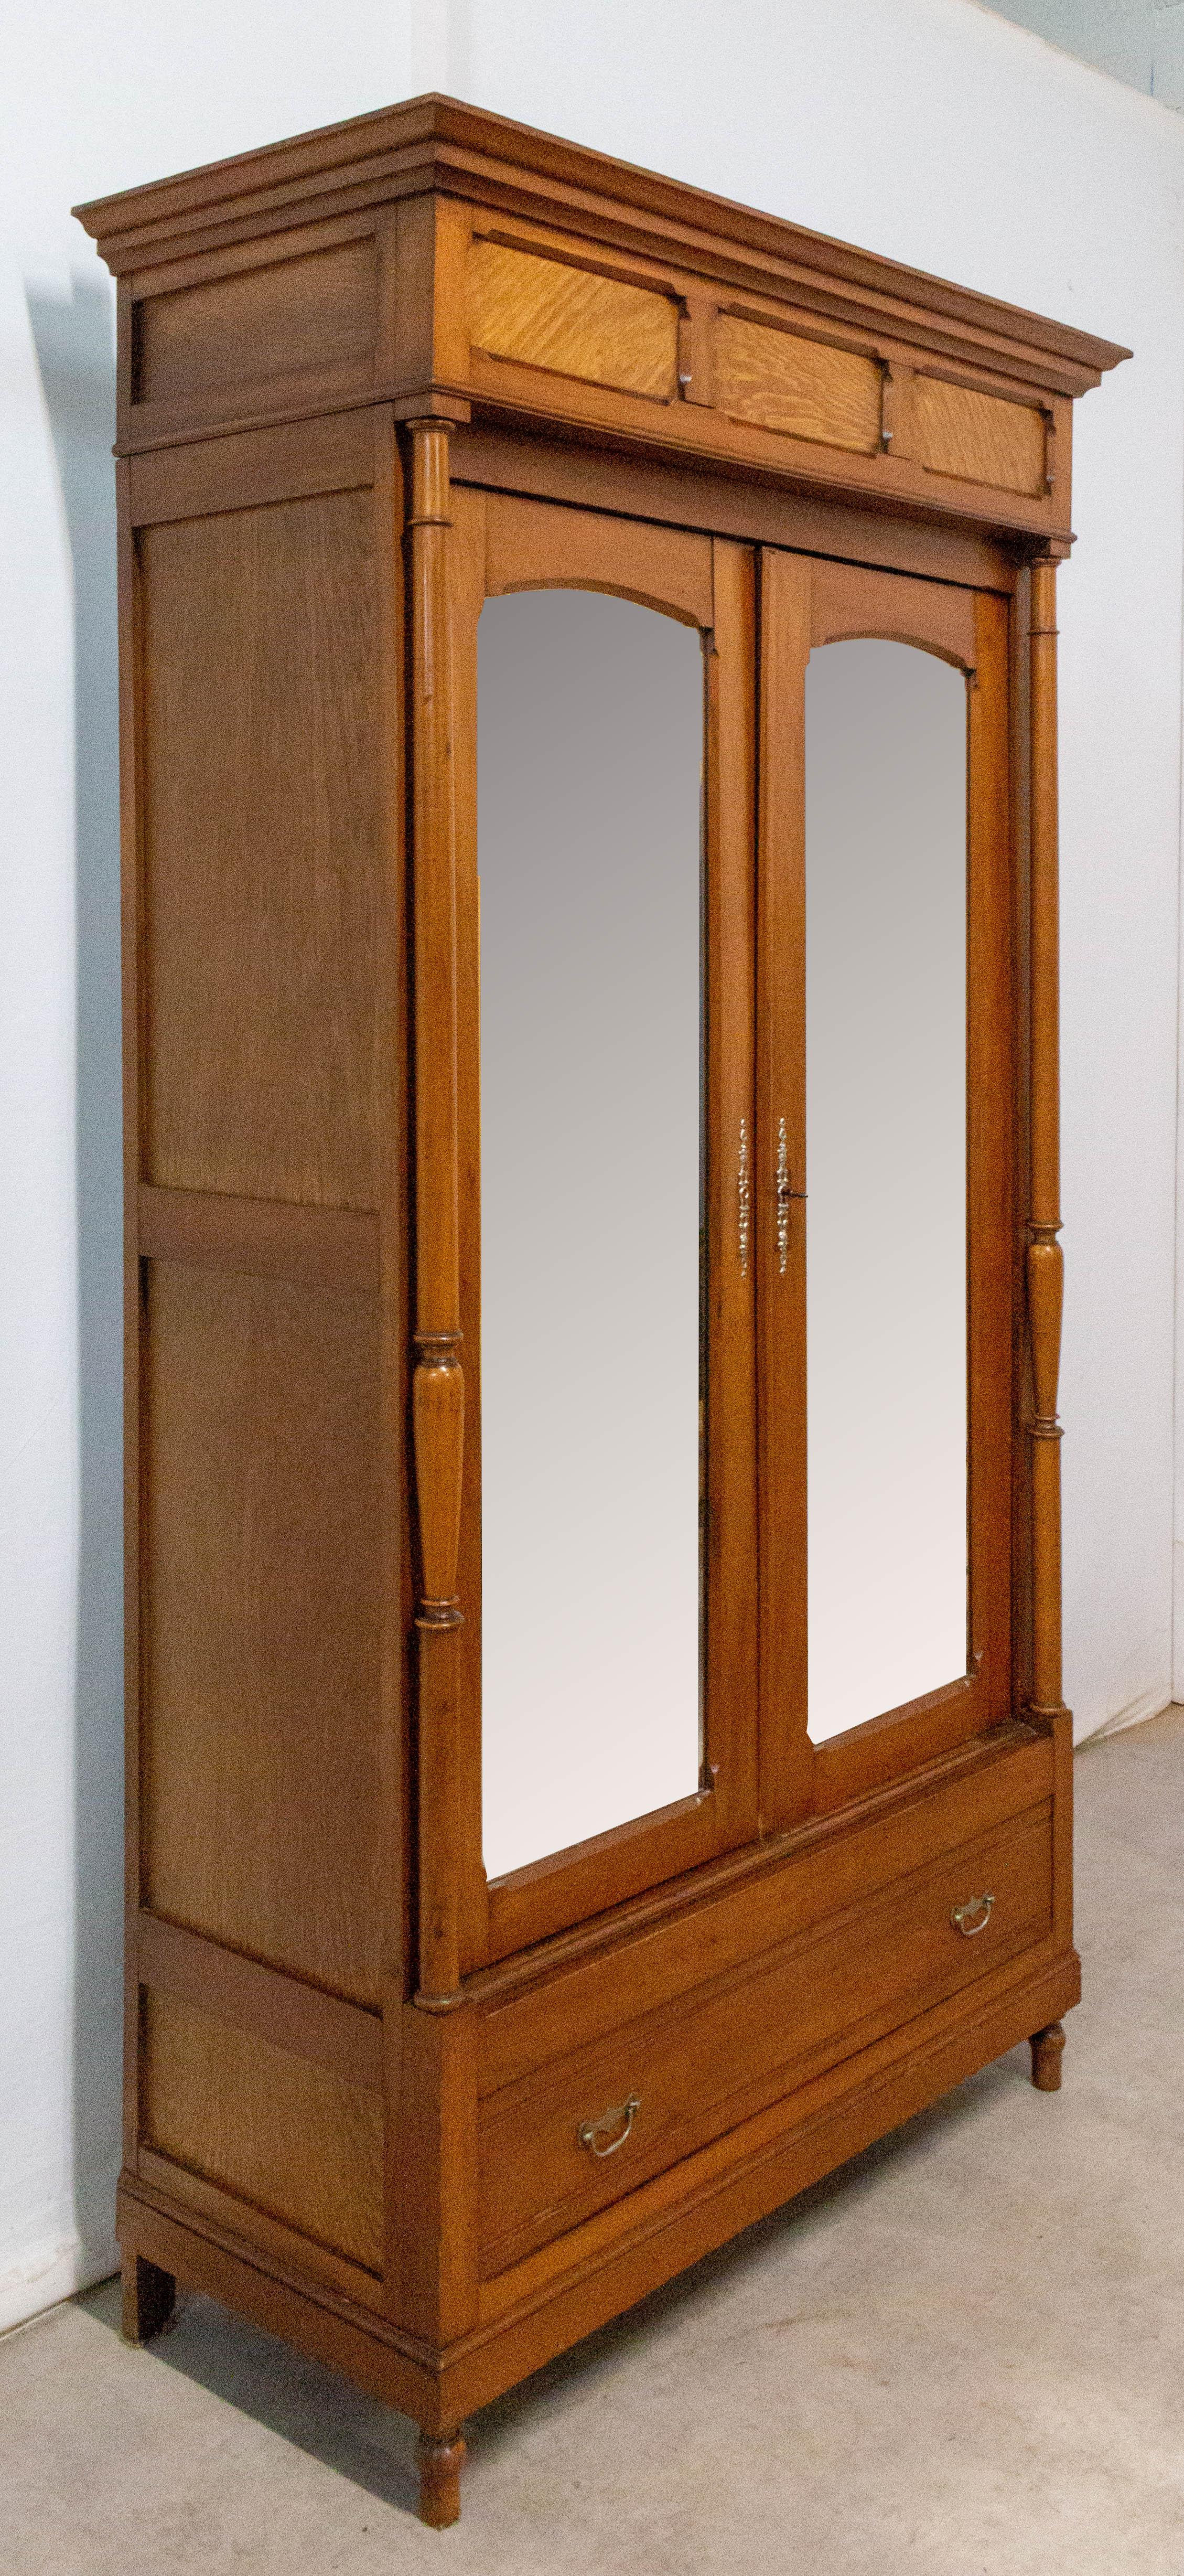 French mirror doors wardrobe 1920, cherrywood armoire
Cabinet with two little drawers inside and a large drawer below the doors.
Very good condition.

Shipping:
46/110/191 cm 86 kg.
  